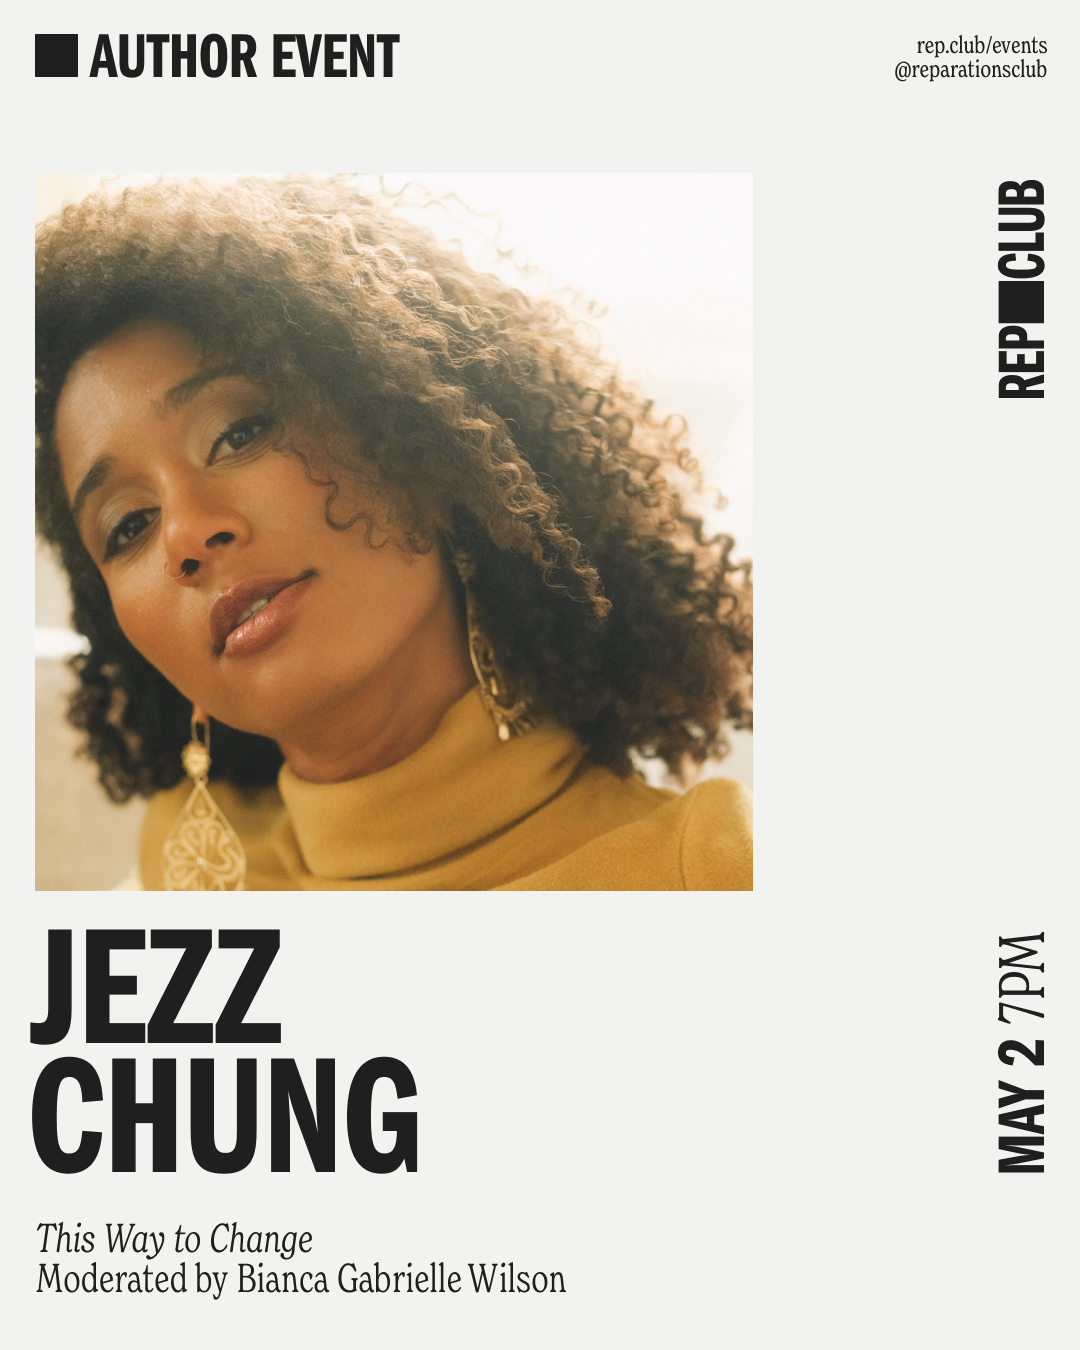 May 2nd EVENT: This Way to Change // Jezz Chung + Bianca Wilson